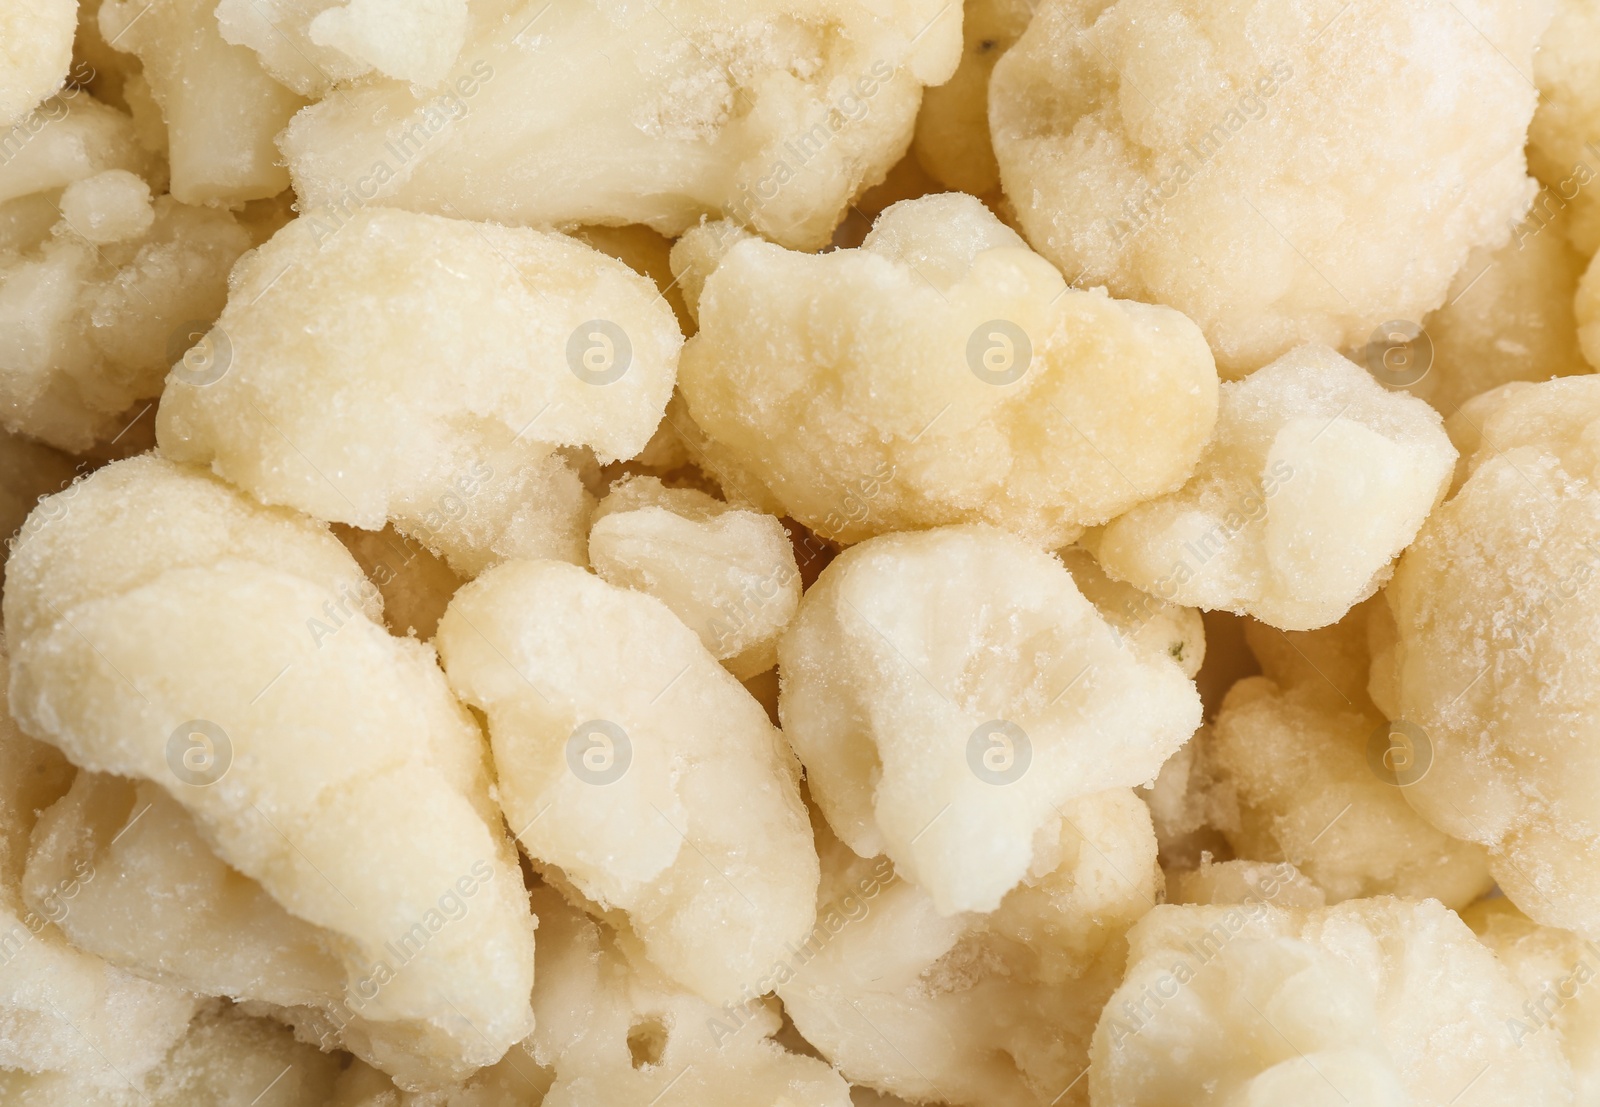 Photo of Frozen cauliflower florets as background, top view. Vegetable preservation